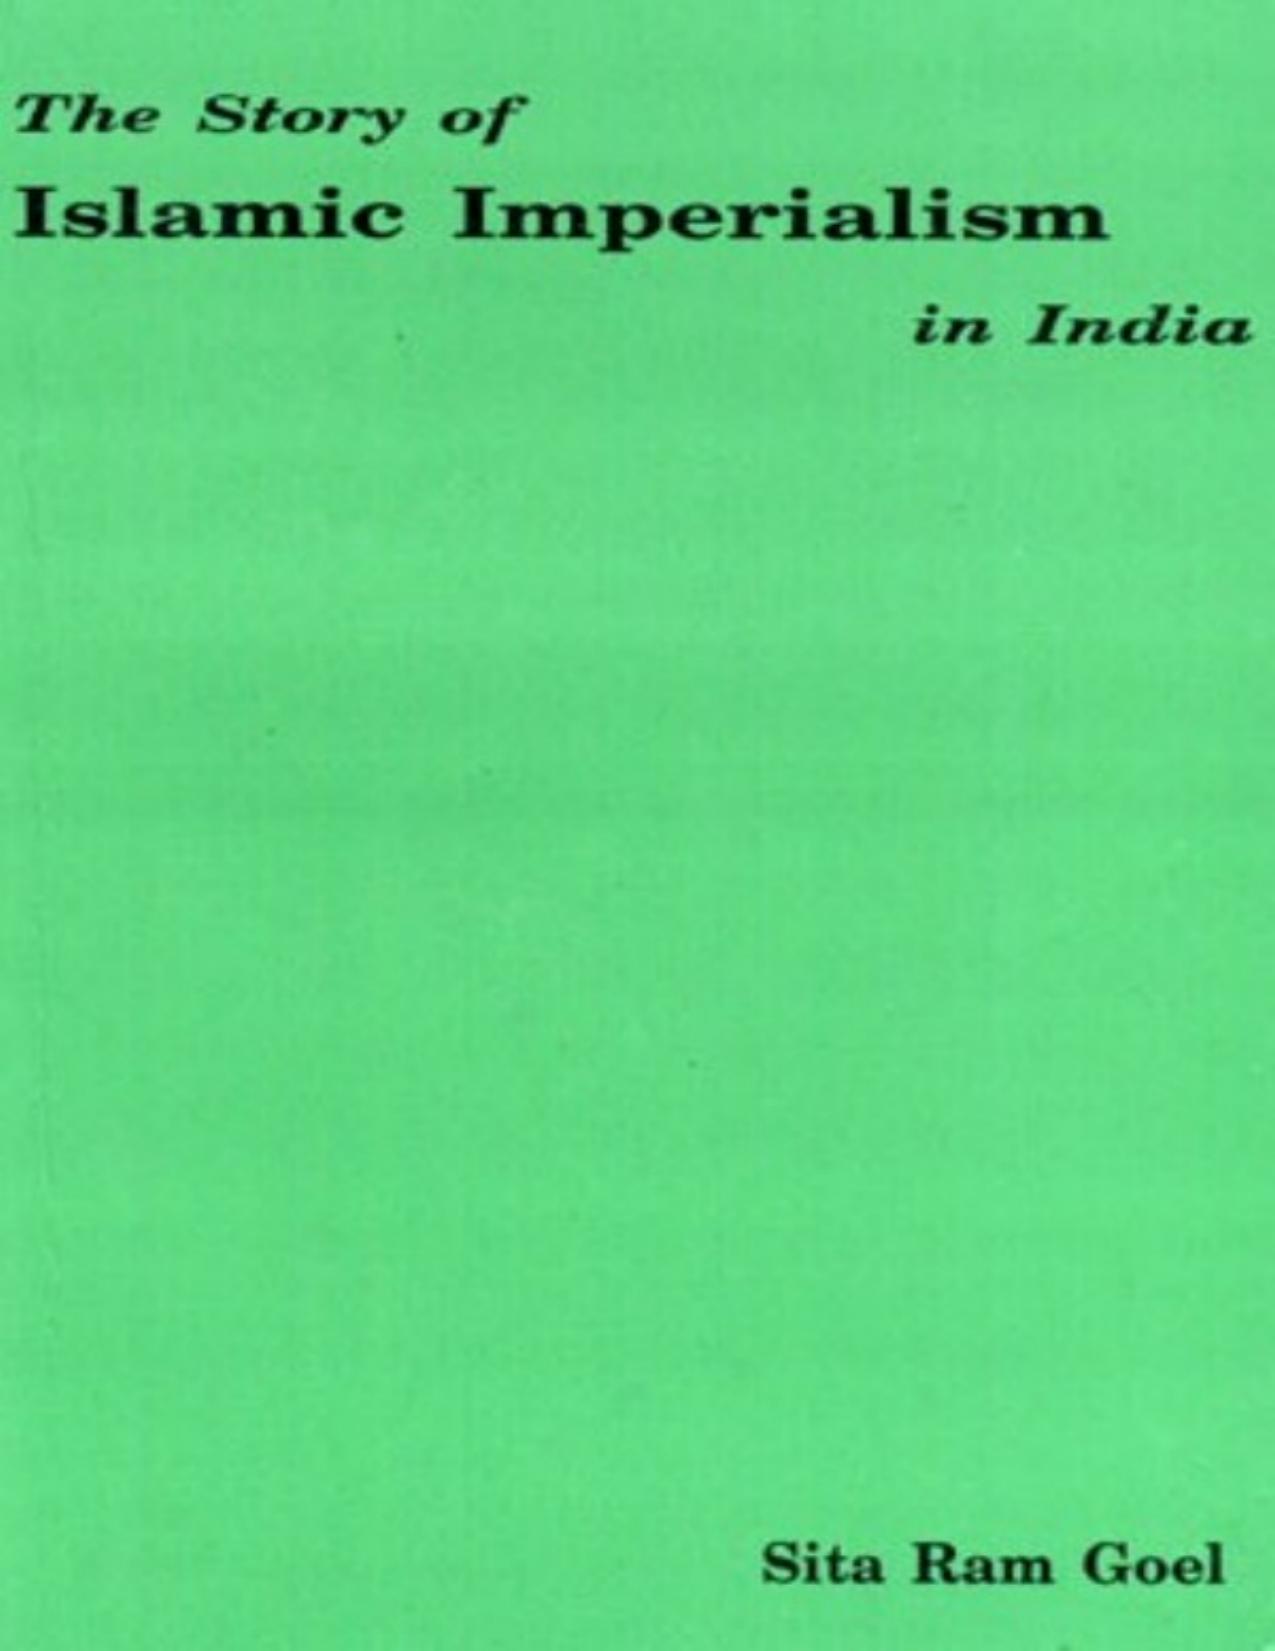 The Story Of Islamic Imperialism In India by Sita Ram Goel